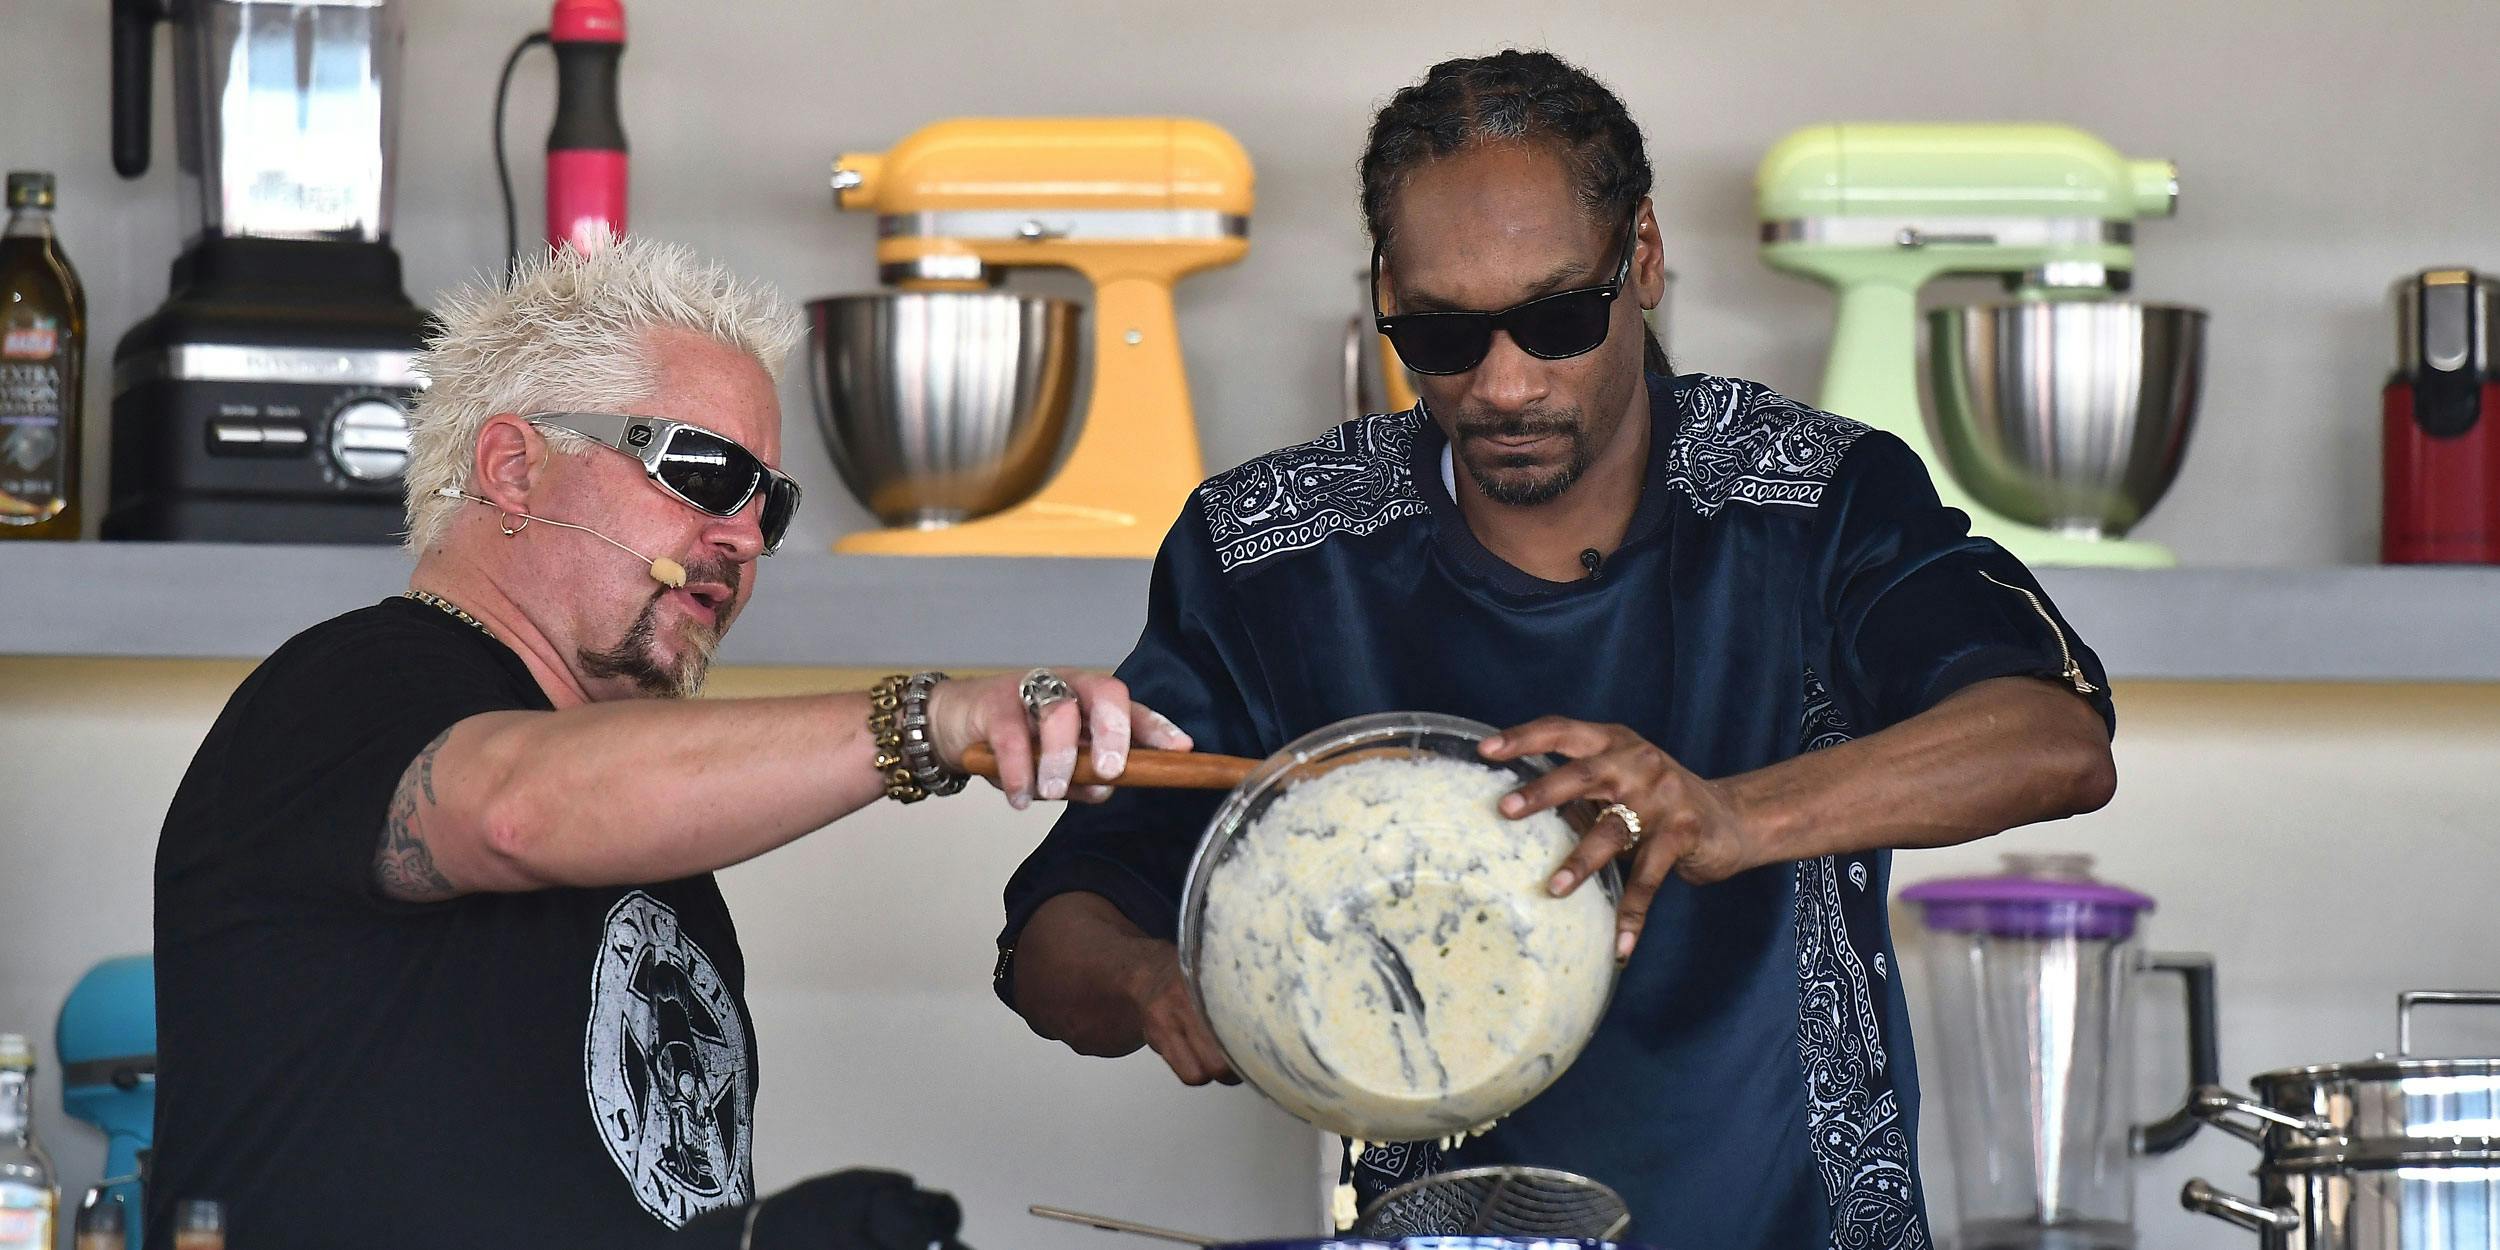 MIAMI BEACH, FL - FEBRUARY 25: Guy Fieri and Snoop Dogg cook on stage at Goya Foods' Grand Tasting Village on February 25, 2017 in Miami Beach, Florida. Snoop Dogg’s cookbook will be available in stores on October 23. (Photo by Gustavo Caballero/Getty Images for SOBEWFF)